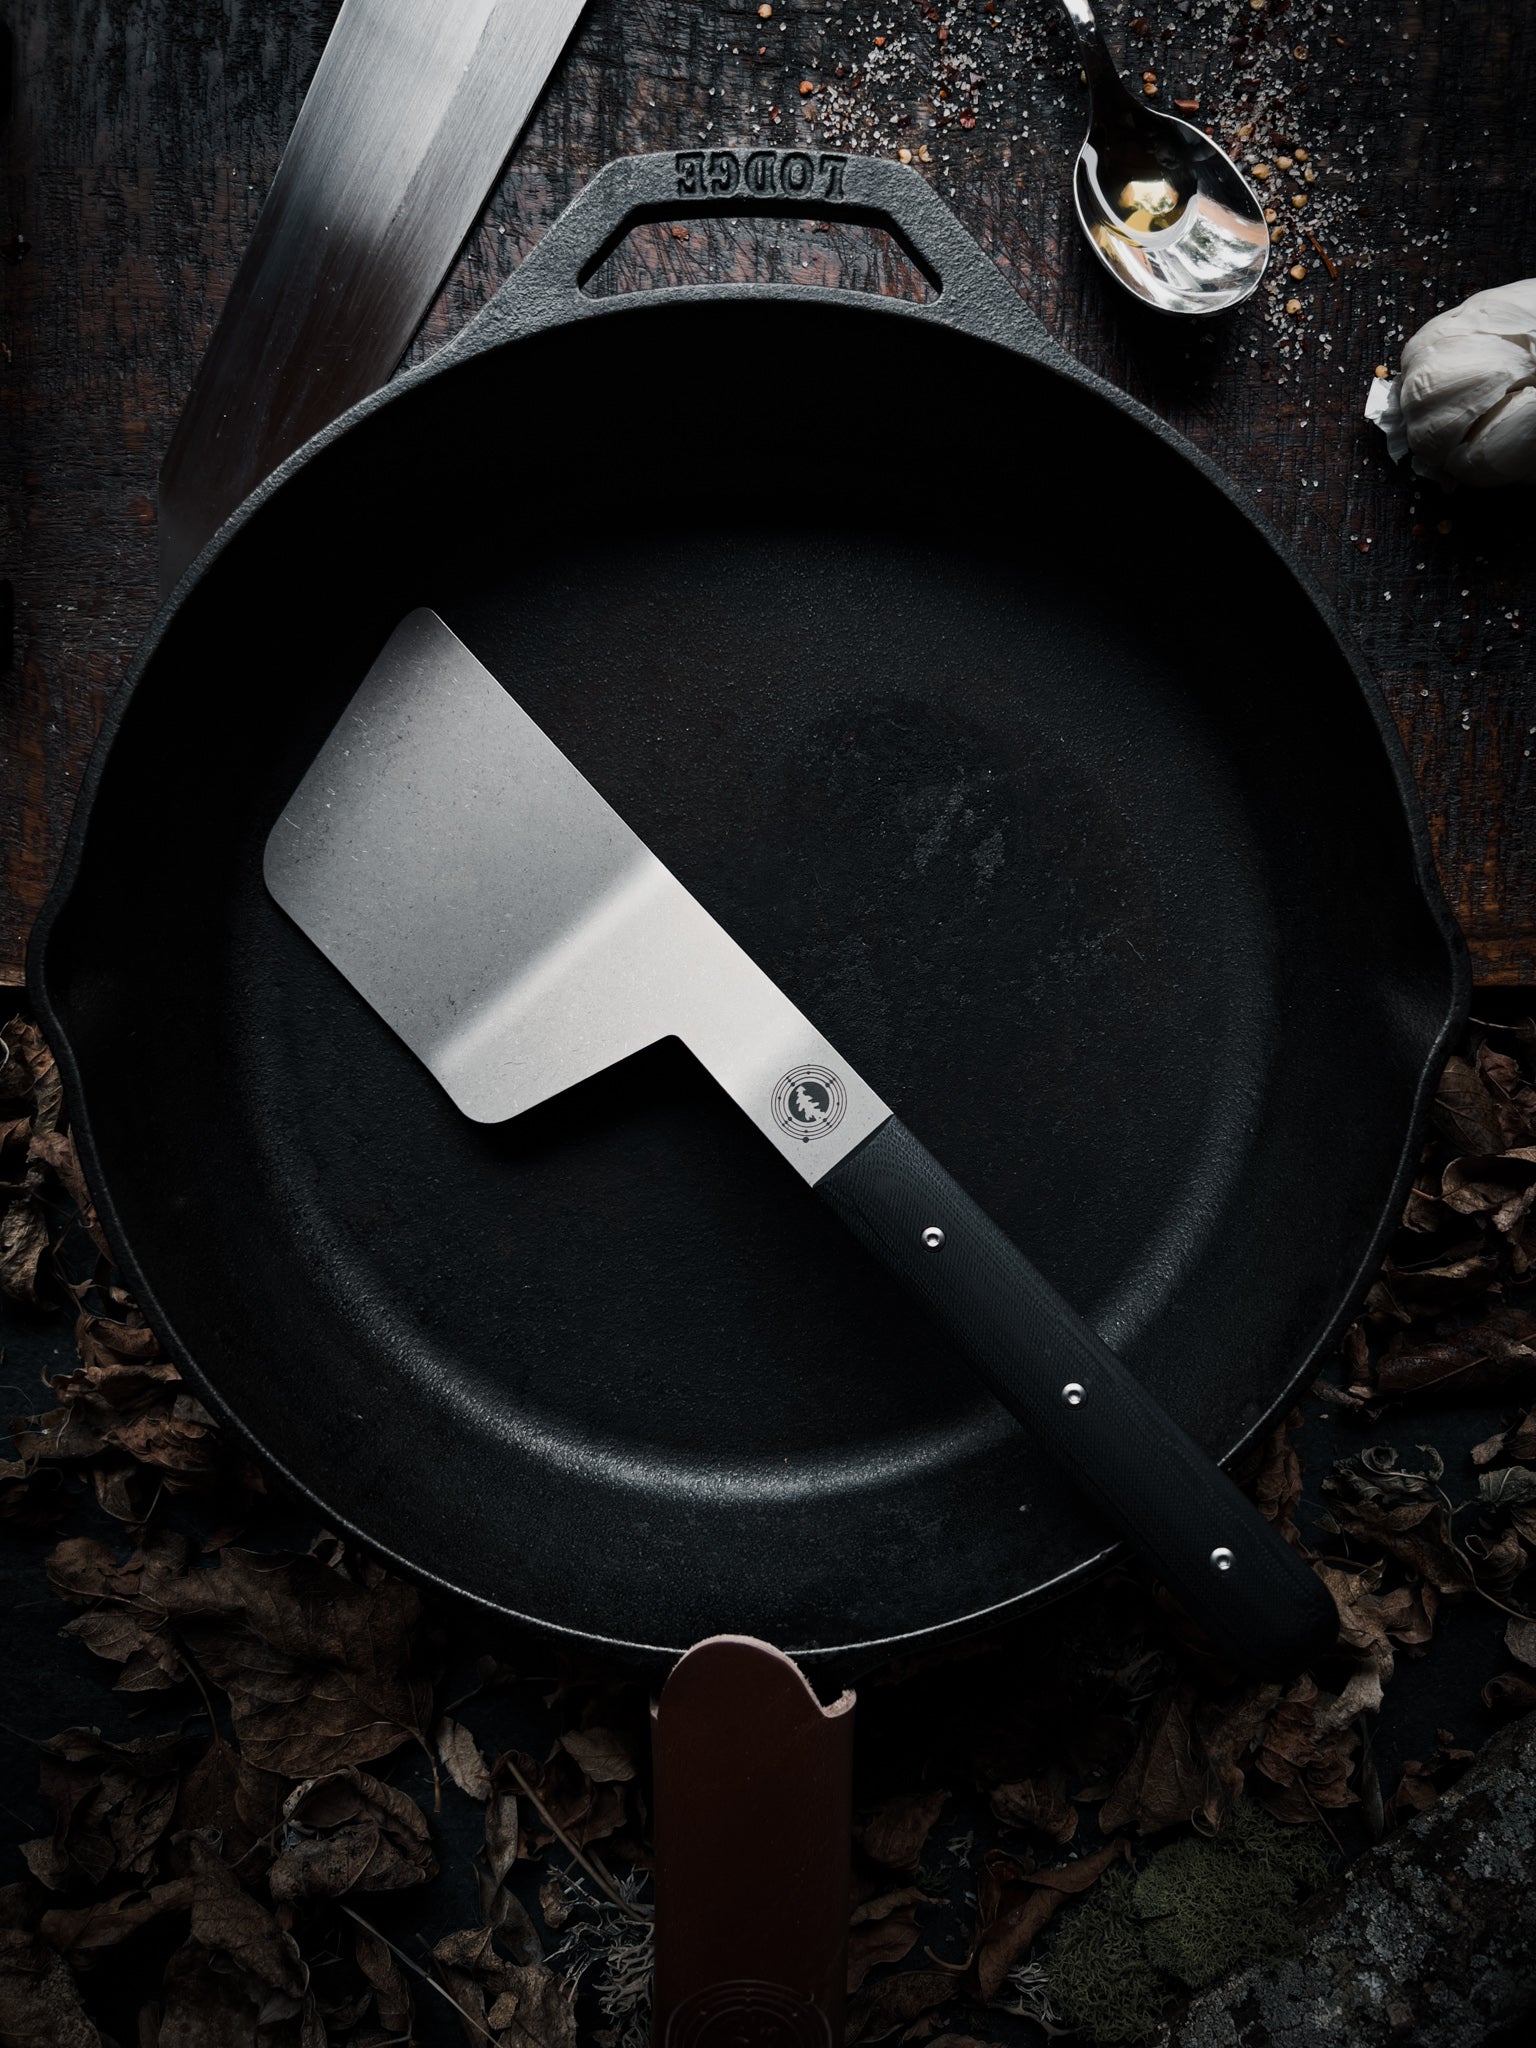 Right- and Left-Handed Spatulas